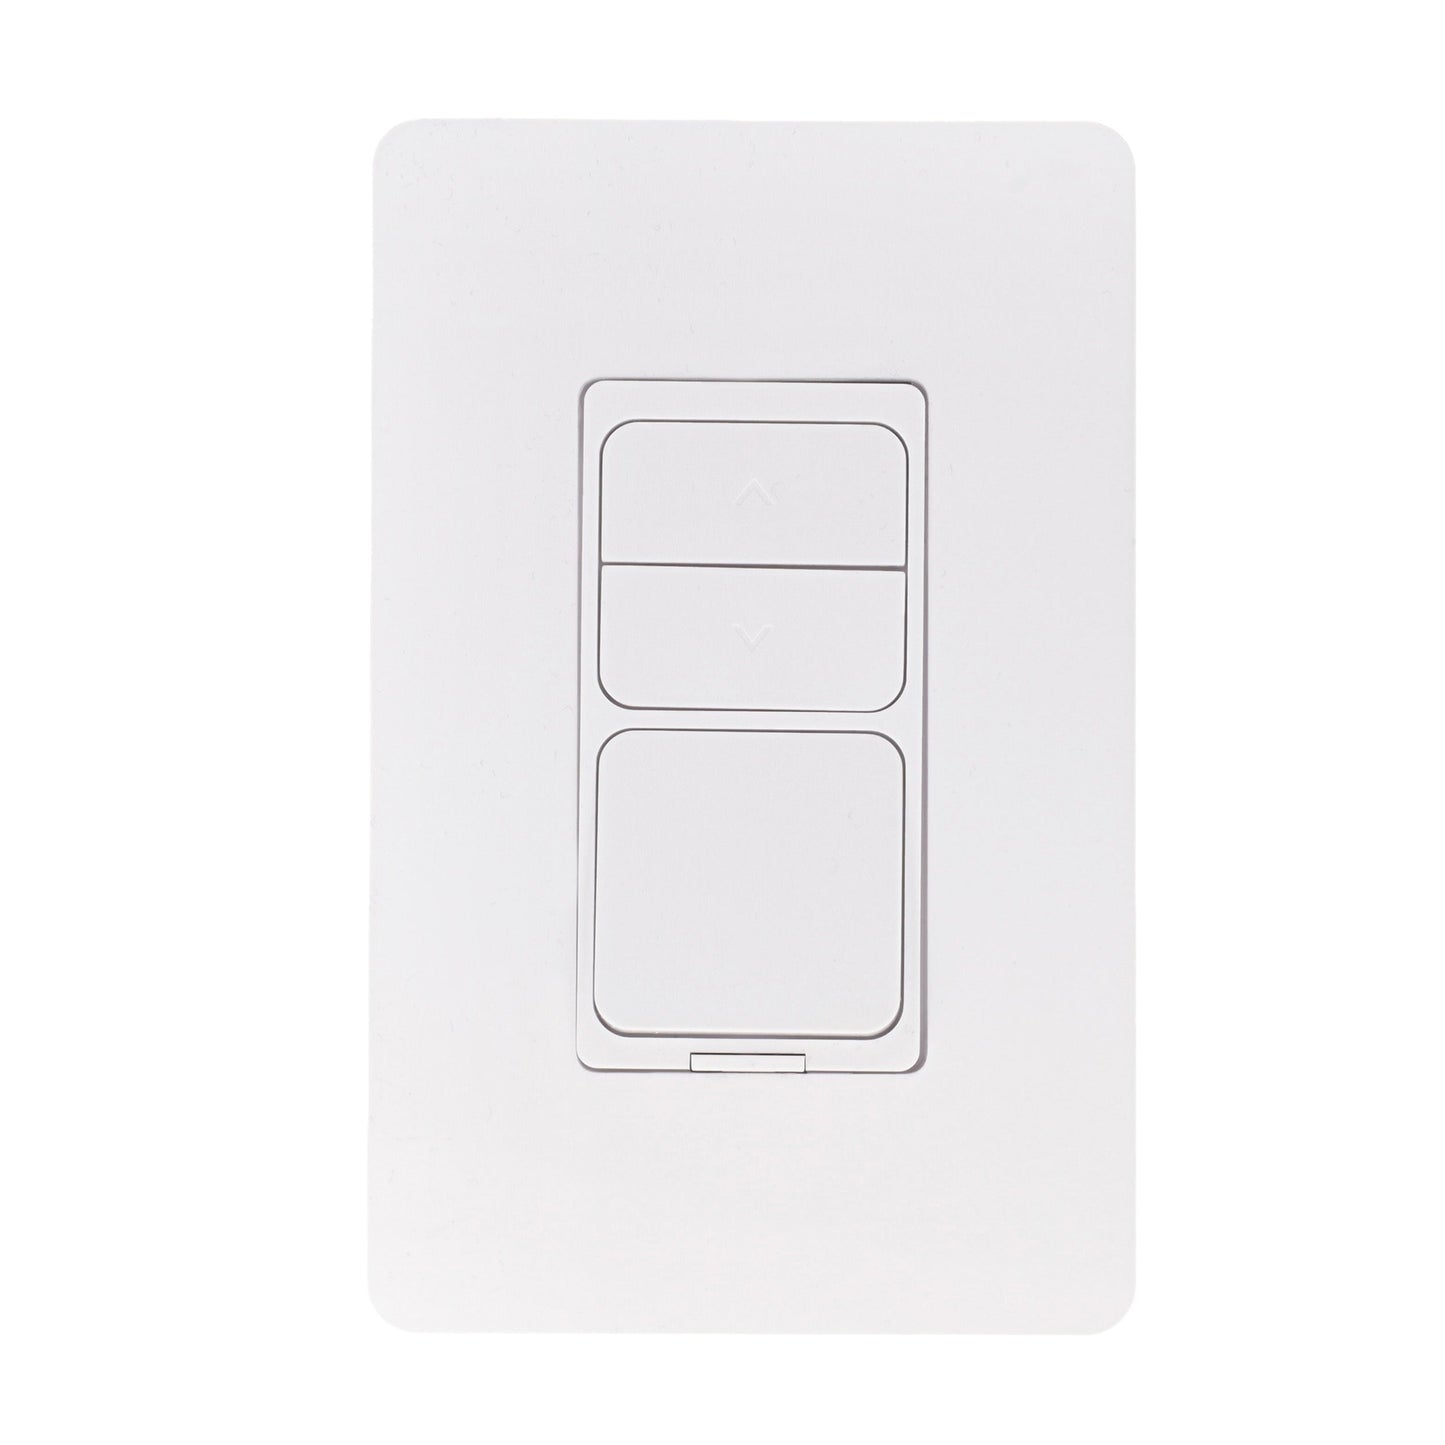 SMART DIMMER WALL SWITCH